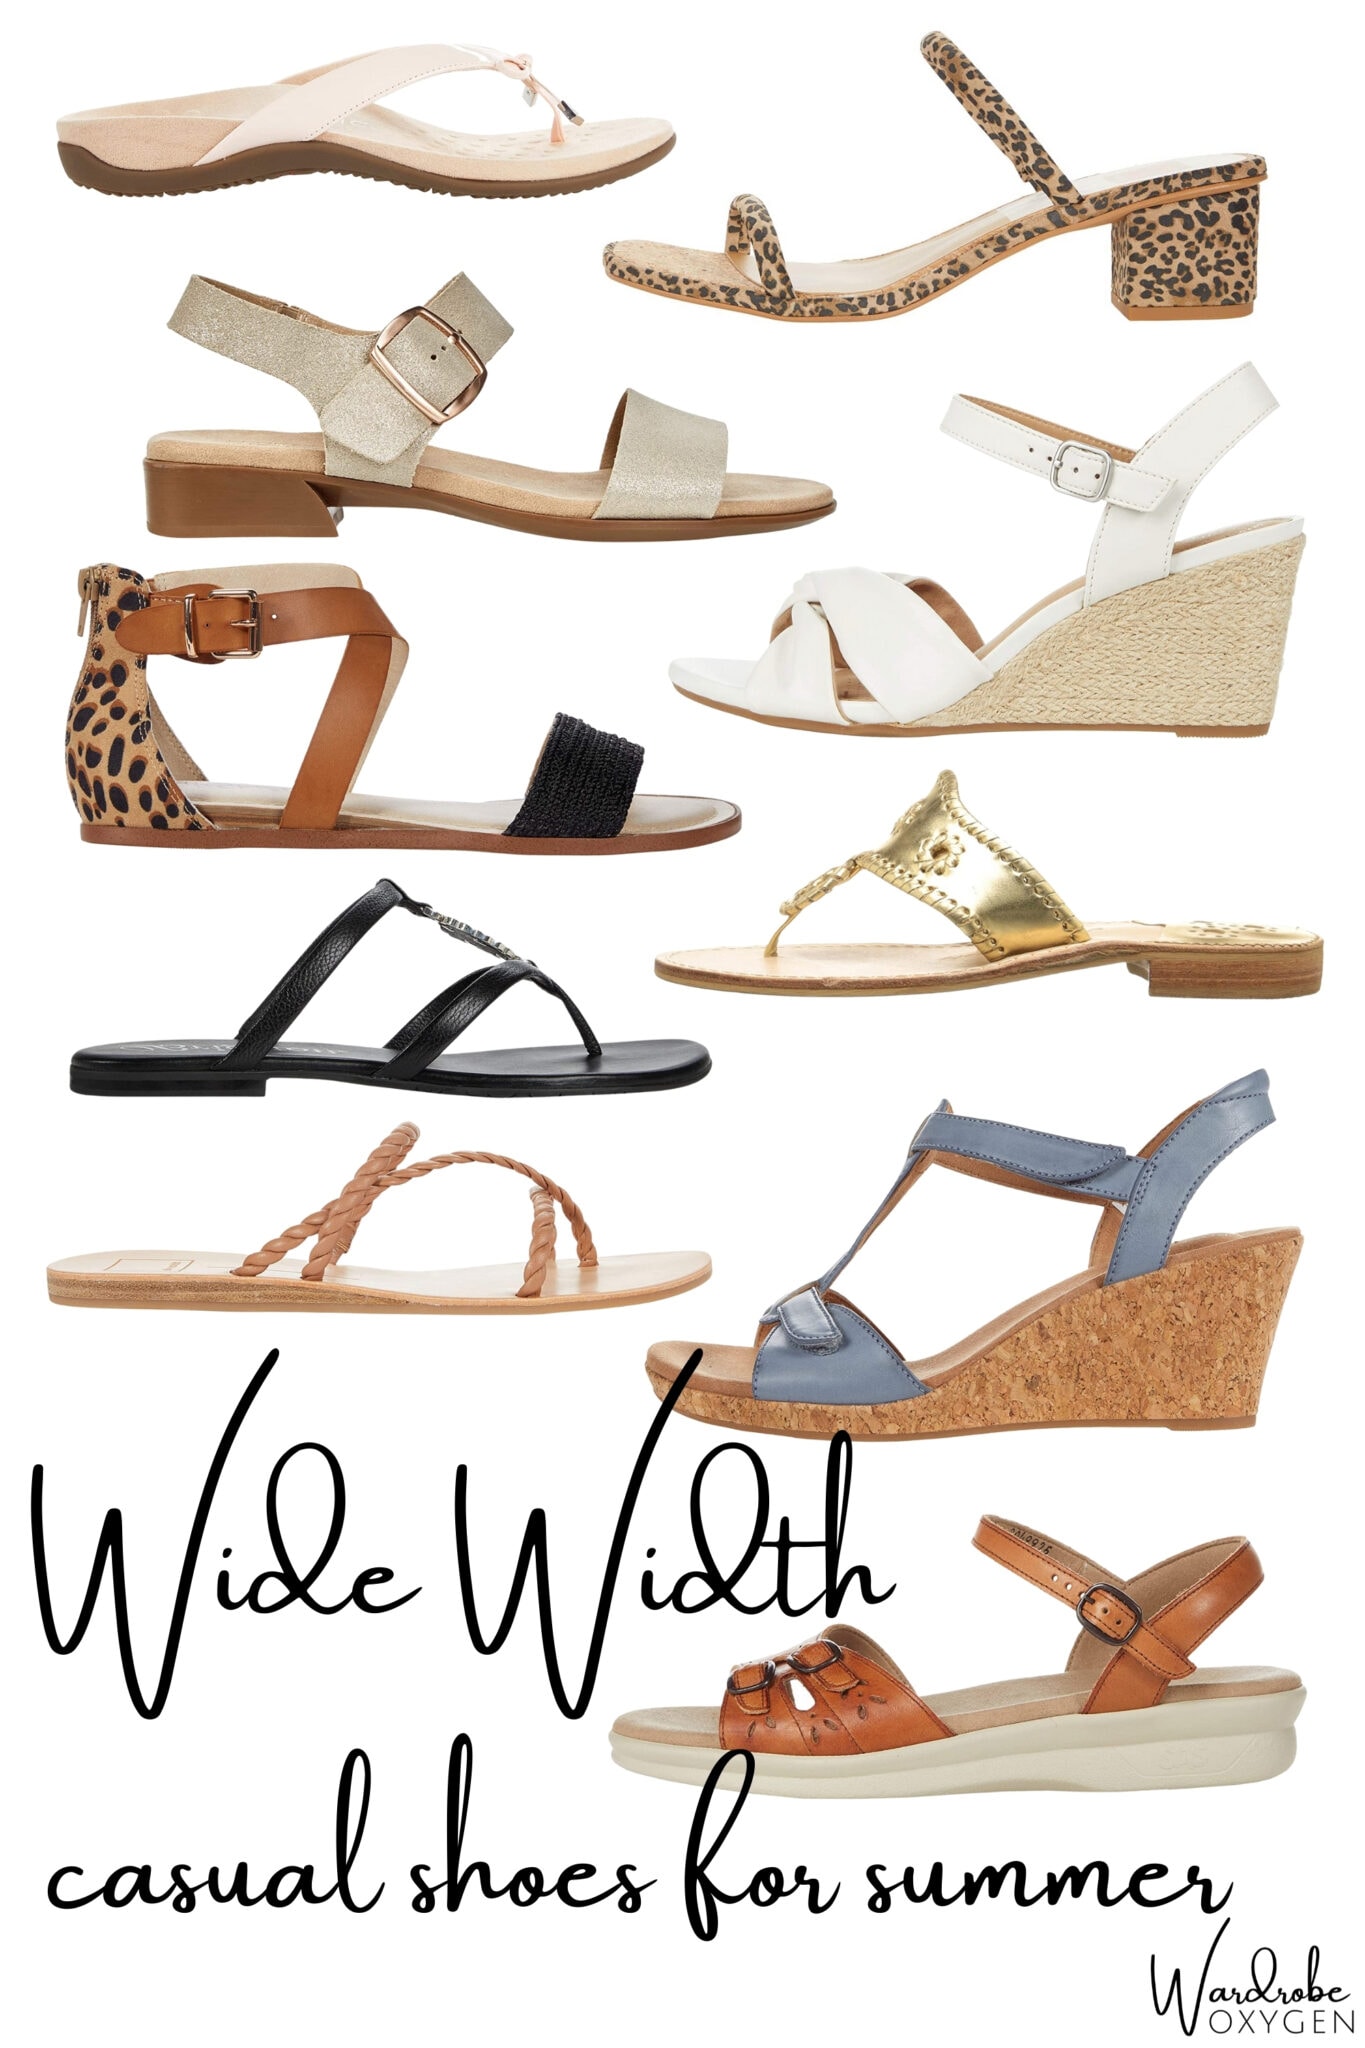 The Best Wide Width Shoes for Summer from Zappos | Wardrobe Oxygen